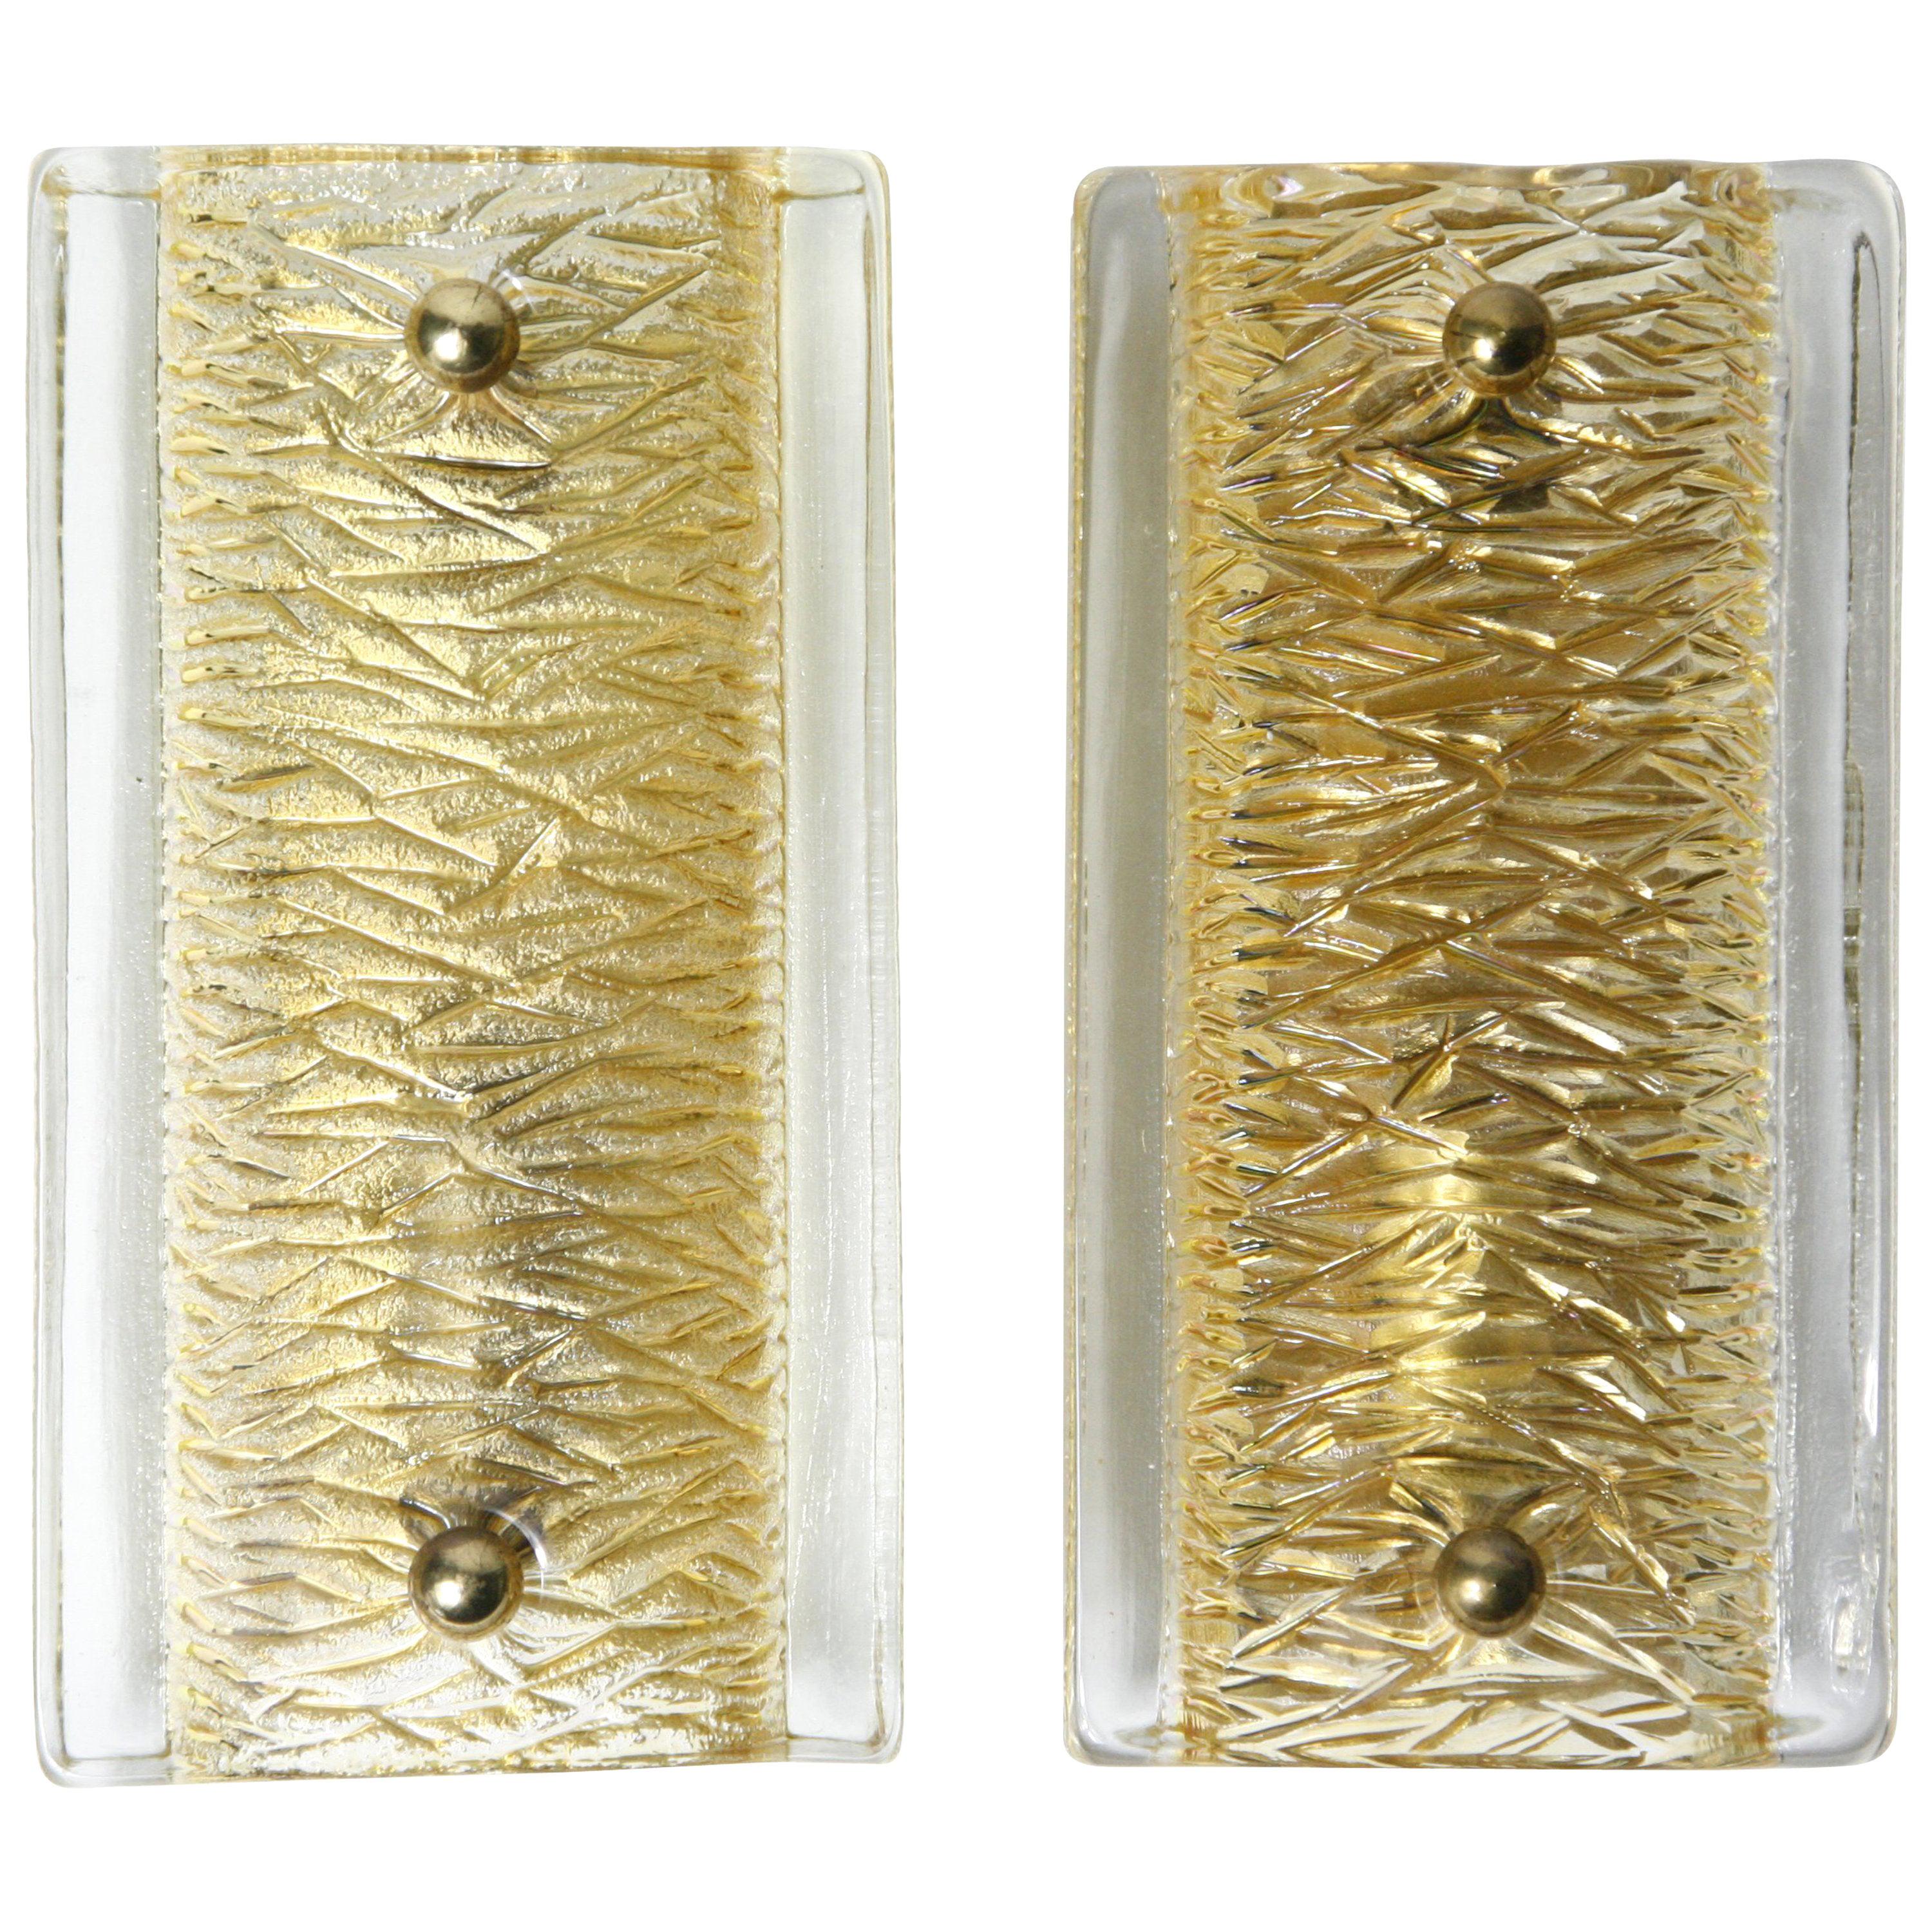 Pair of Orrefors amber colored glass sconces Sweden 1970, smooth surface outer glass and an inside pattern, glass shades are resting on a brass frame held with brass fasteners.
Hold one candelabra bulb each.